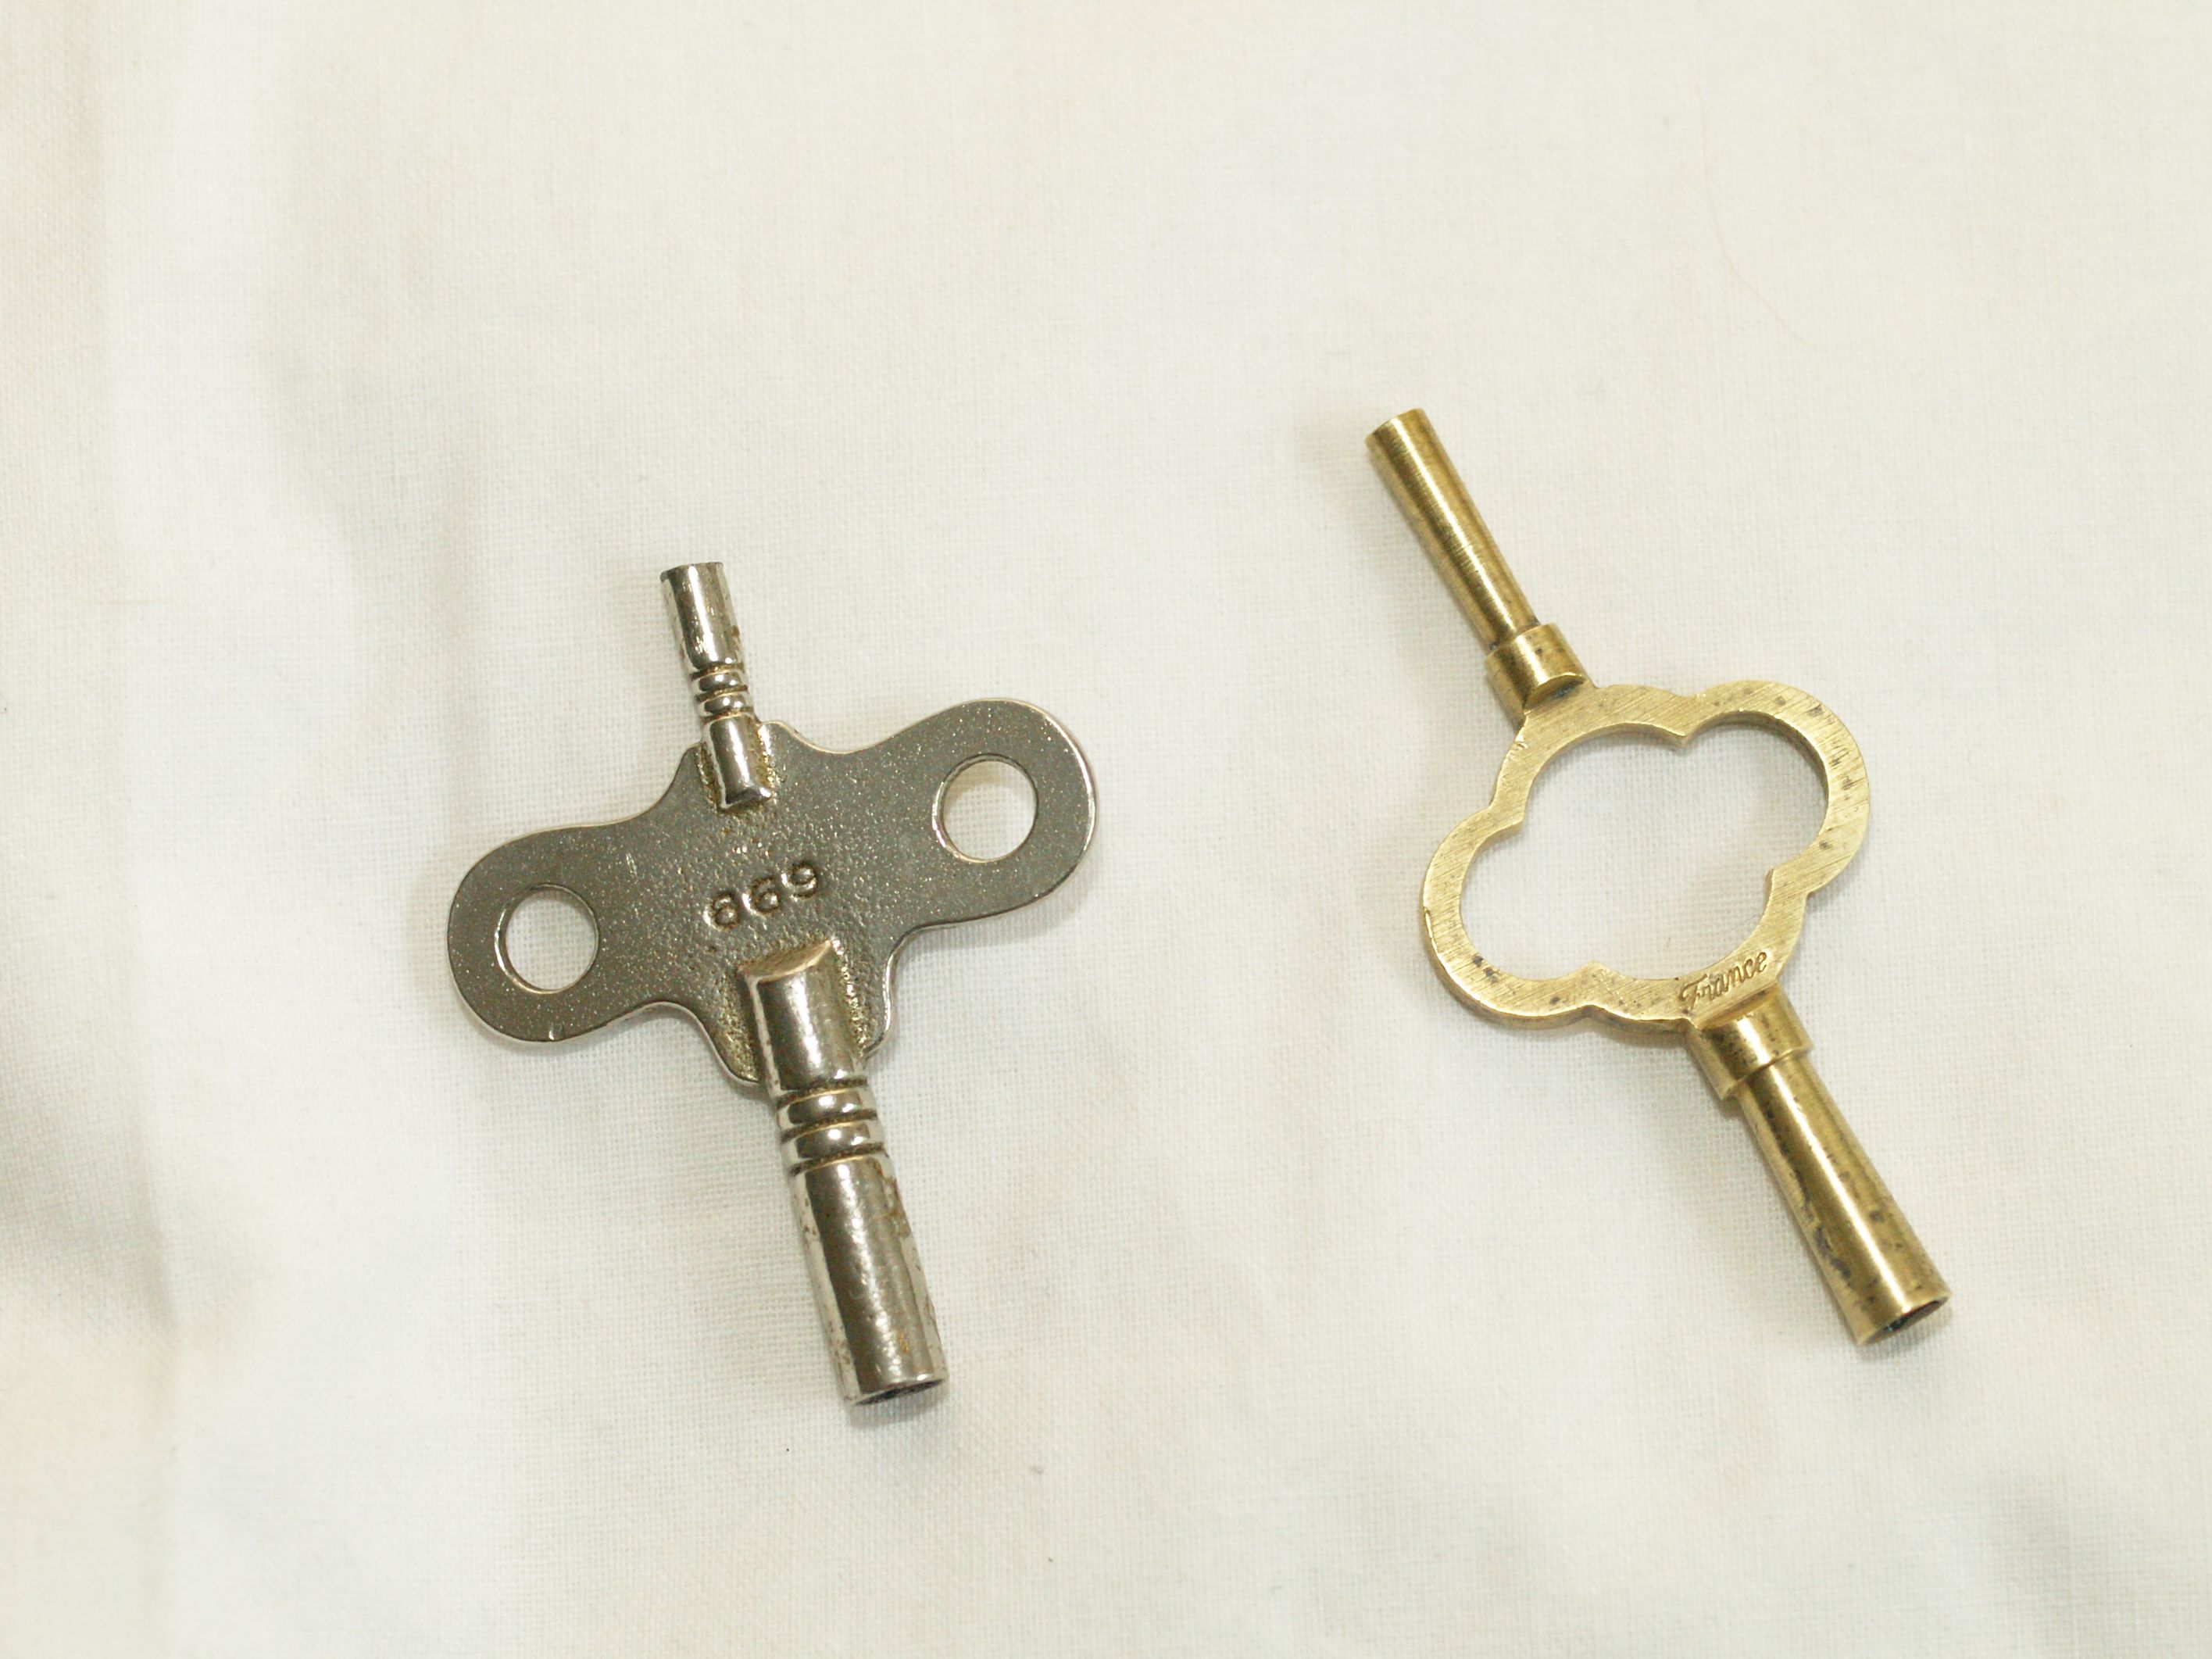 TRAVEL CLOCK KEY DOUBLE END SIZE 2 KEY 2.75 MM  SMALL END 1.75 MM WALL CLOCK 